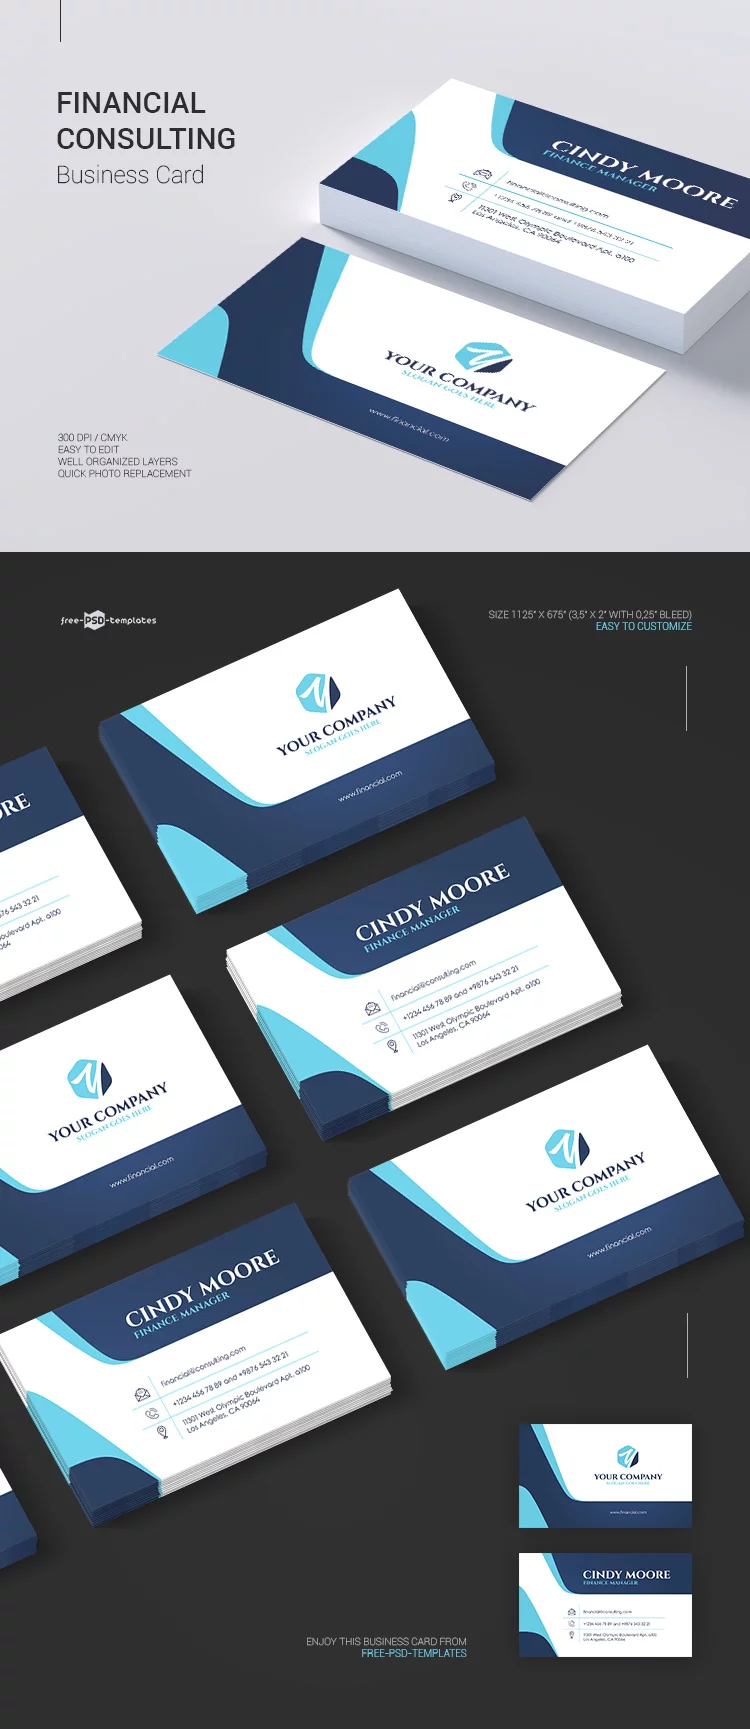 Free Financial Consulting Business Card in PSD